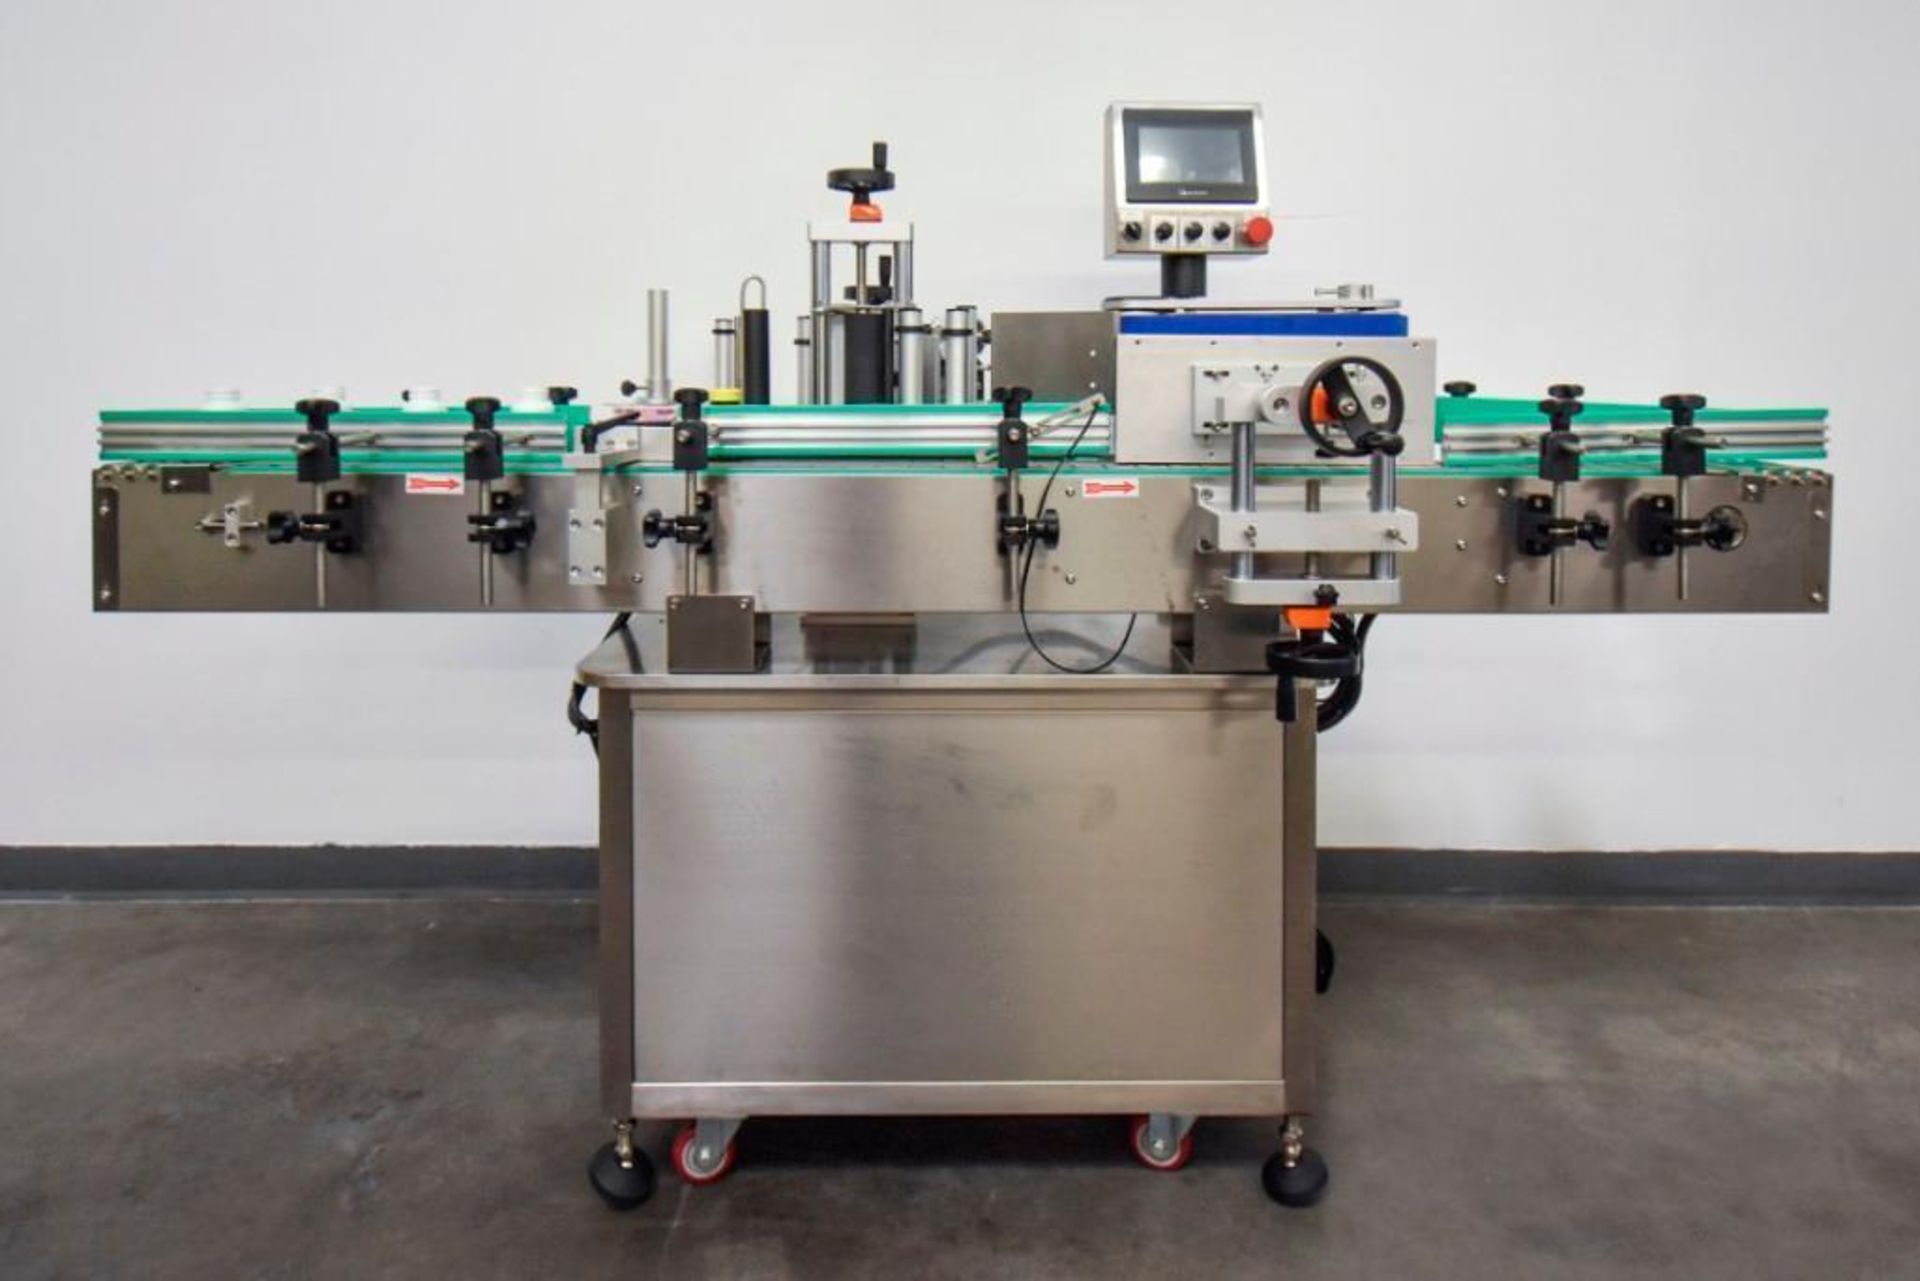 NEW - LZ Company Automatic Labeler MDL LZ300